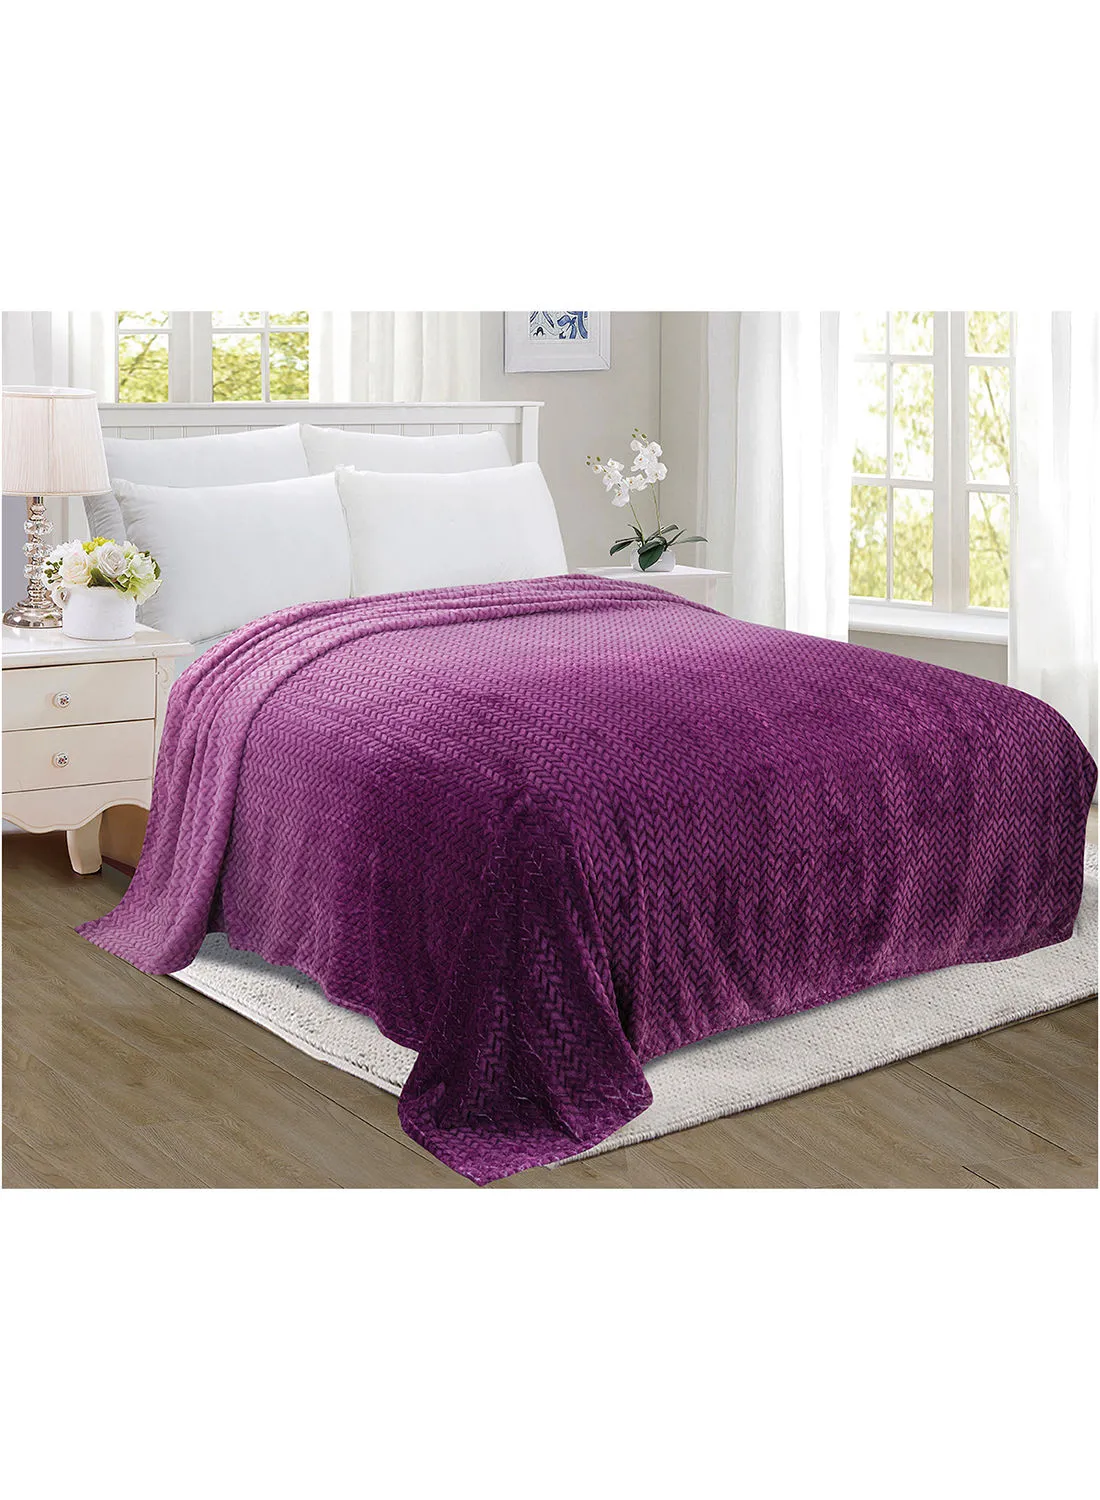 noon east Lightweight Summer Blanket Queen Size 280 GSM Jacquard Extra Soft Fleece All Season Blanket Bed And Sofa Throw  160 X 220 Cms Purple